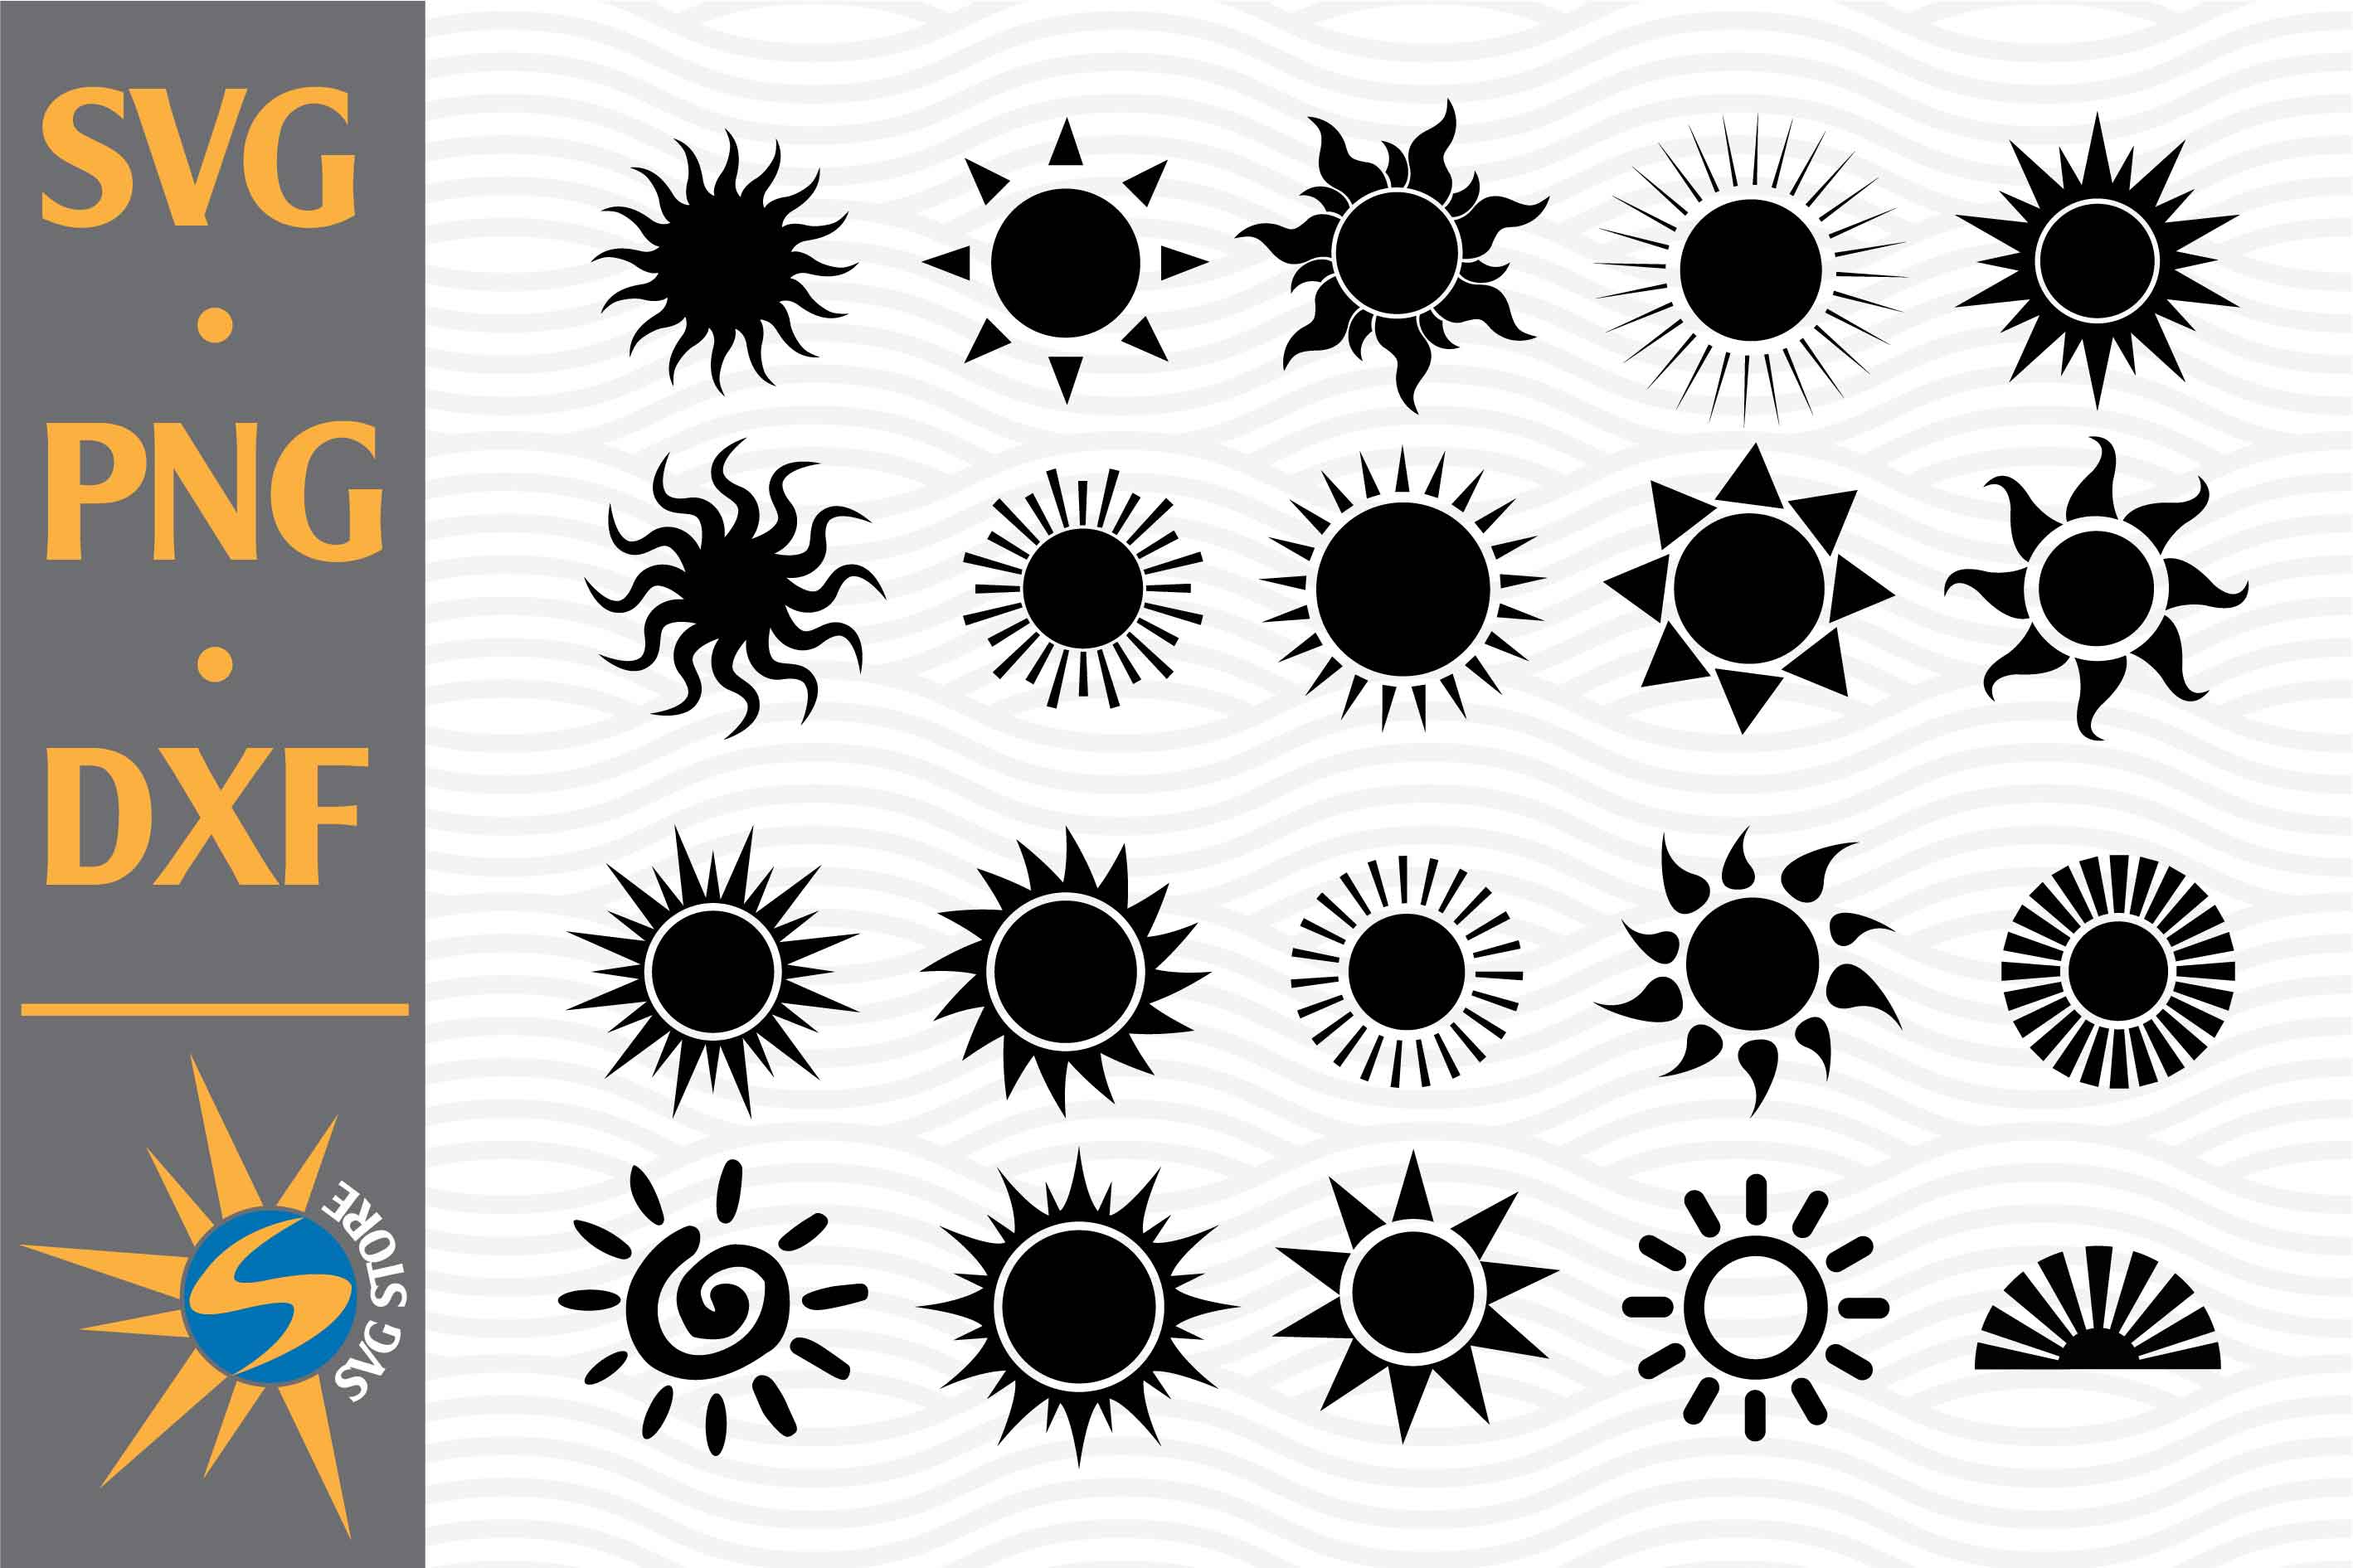 Download Sun Face Cutout Files For Cricut Svg And Silhouette Studio File Cut Out Stencil Decal Logo Svgs The Sun Face Stencils Templates Craft Supplies Tools Kromasol Com